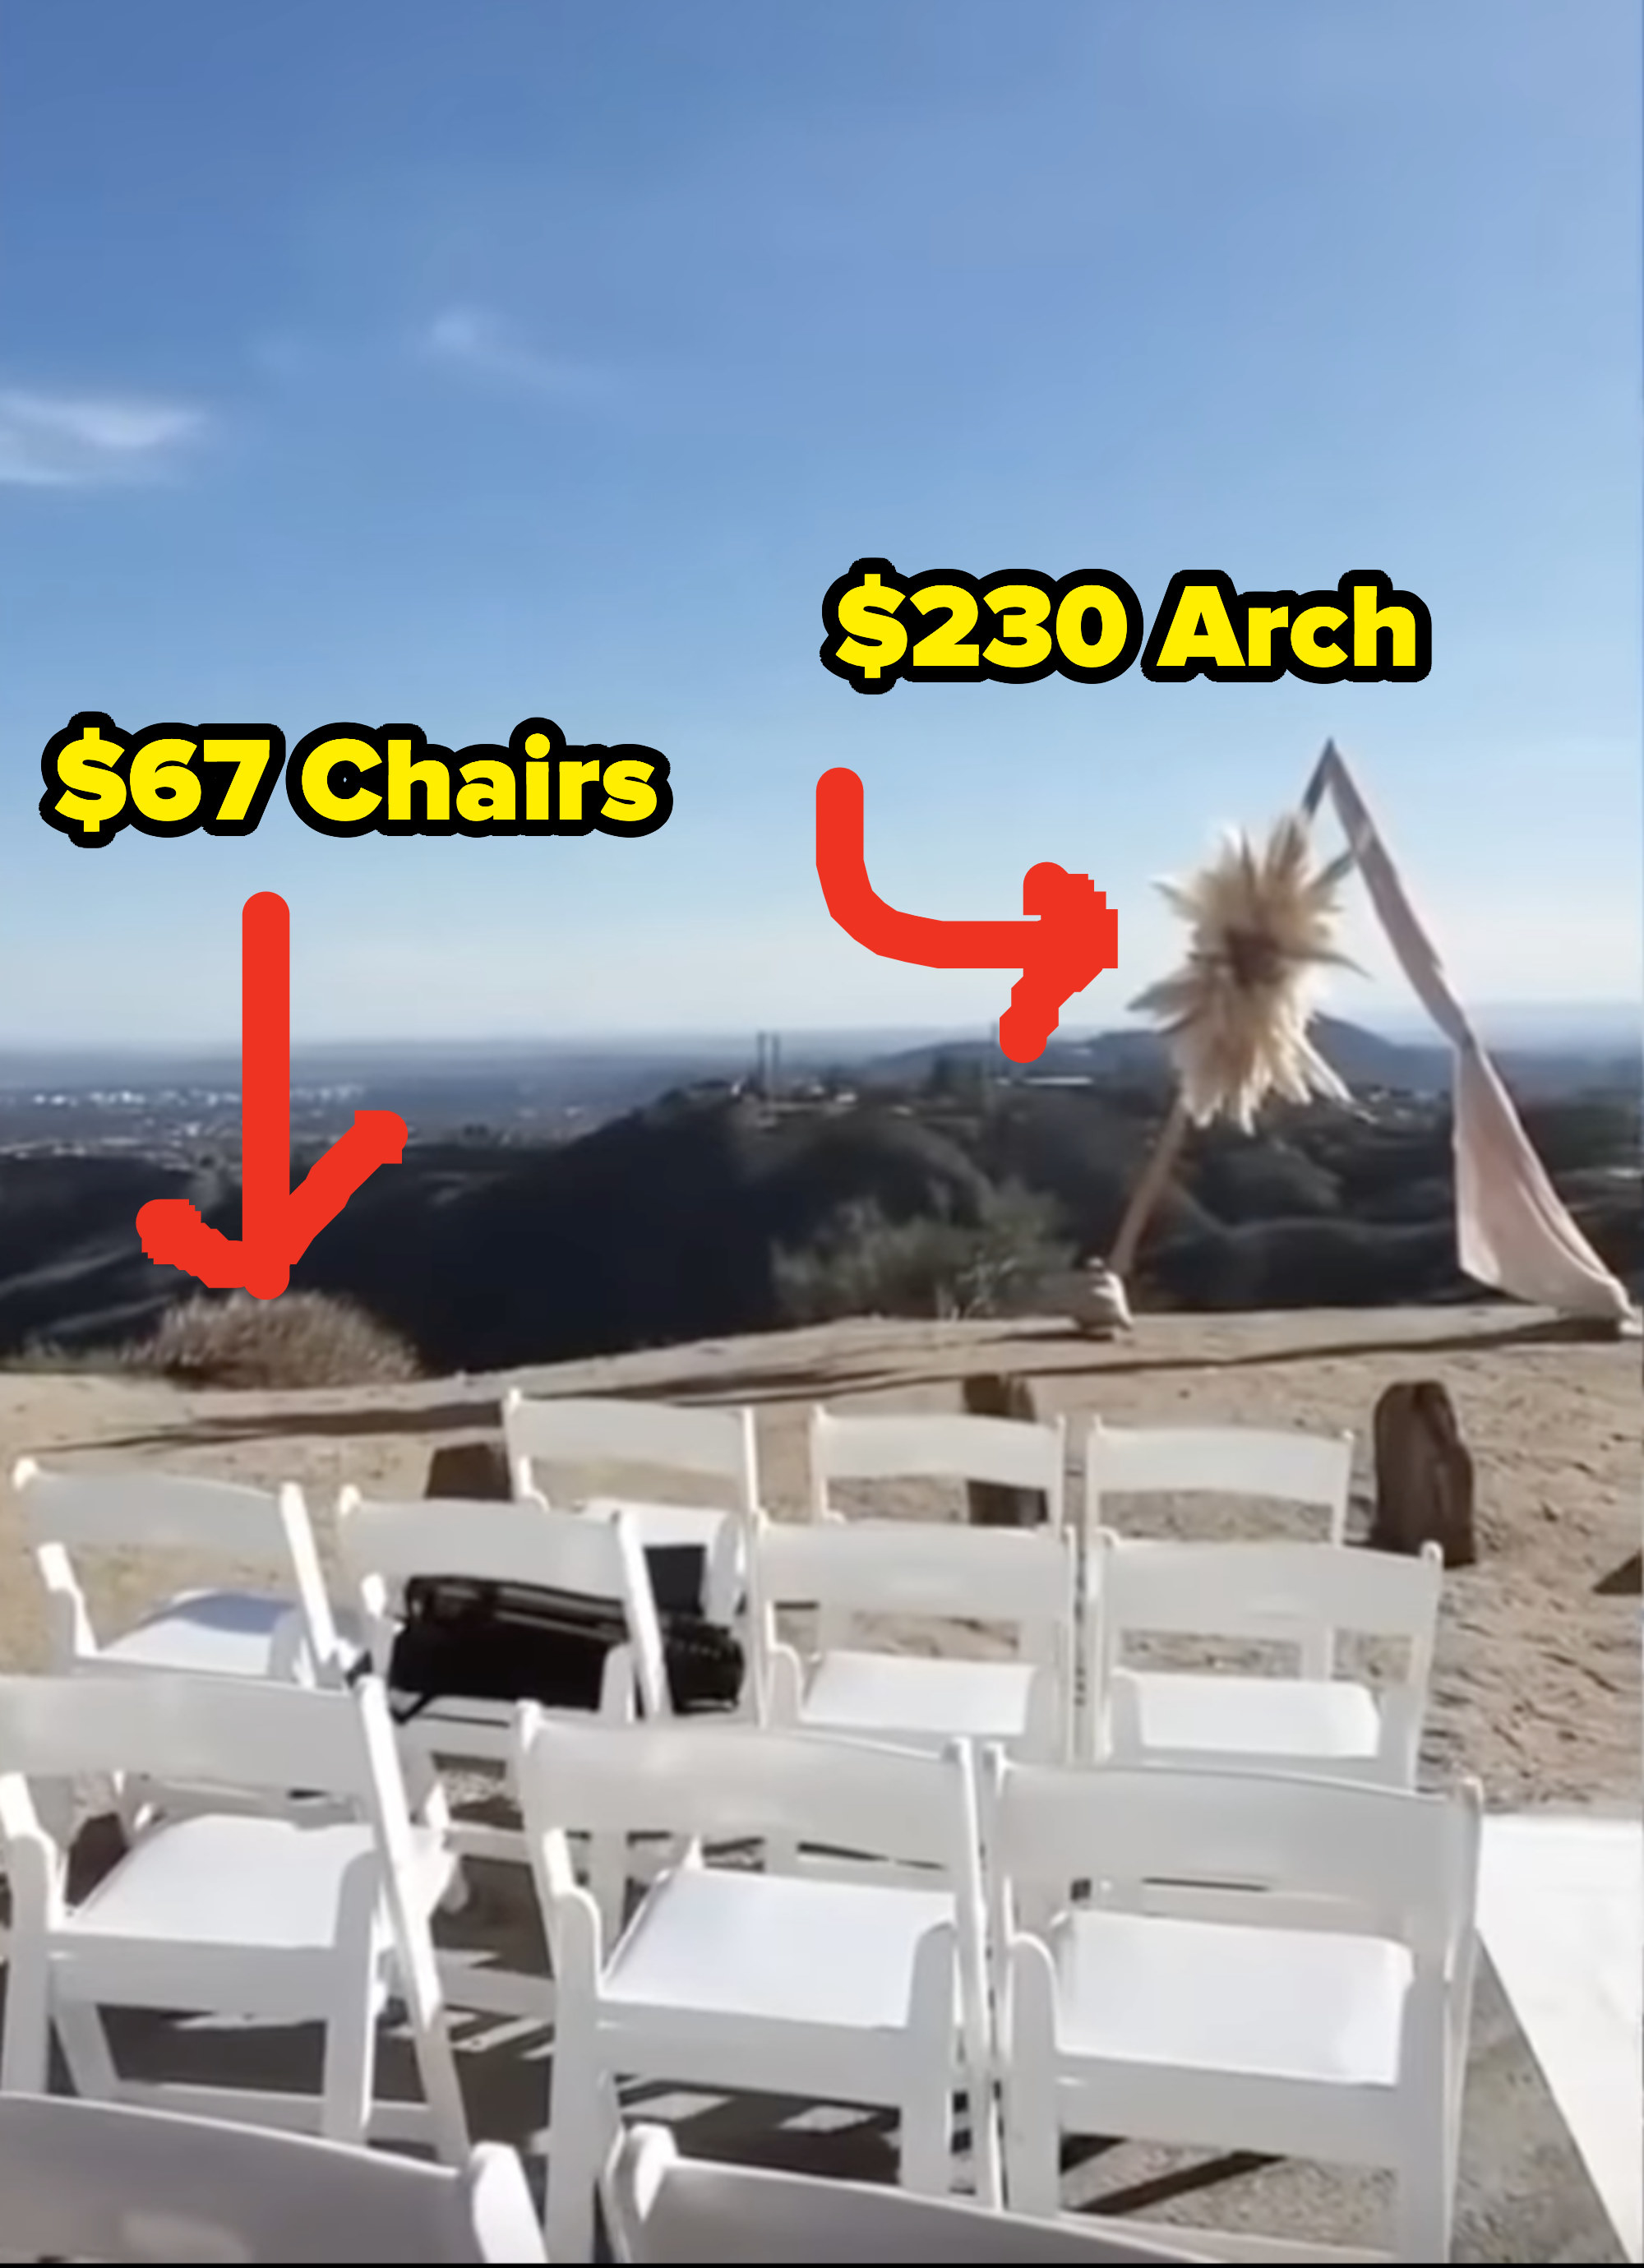 Arrows pointing to$67 chairs and a $230 arch